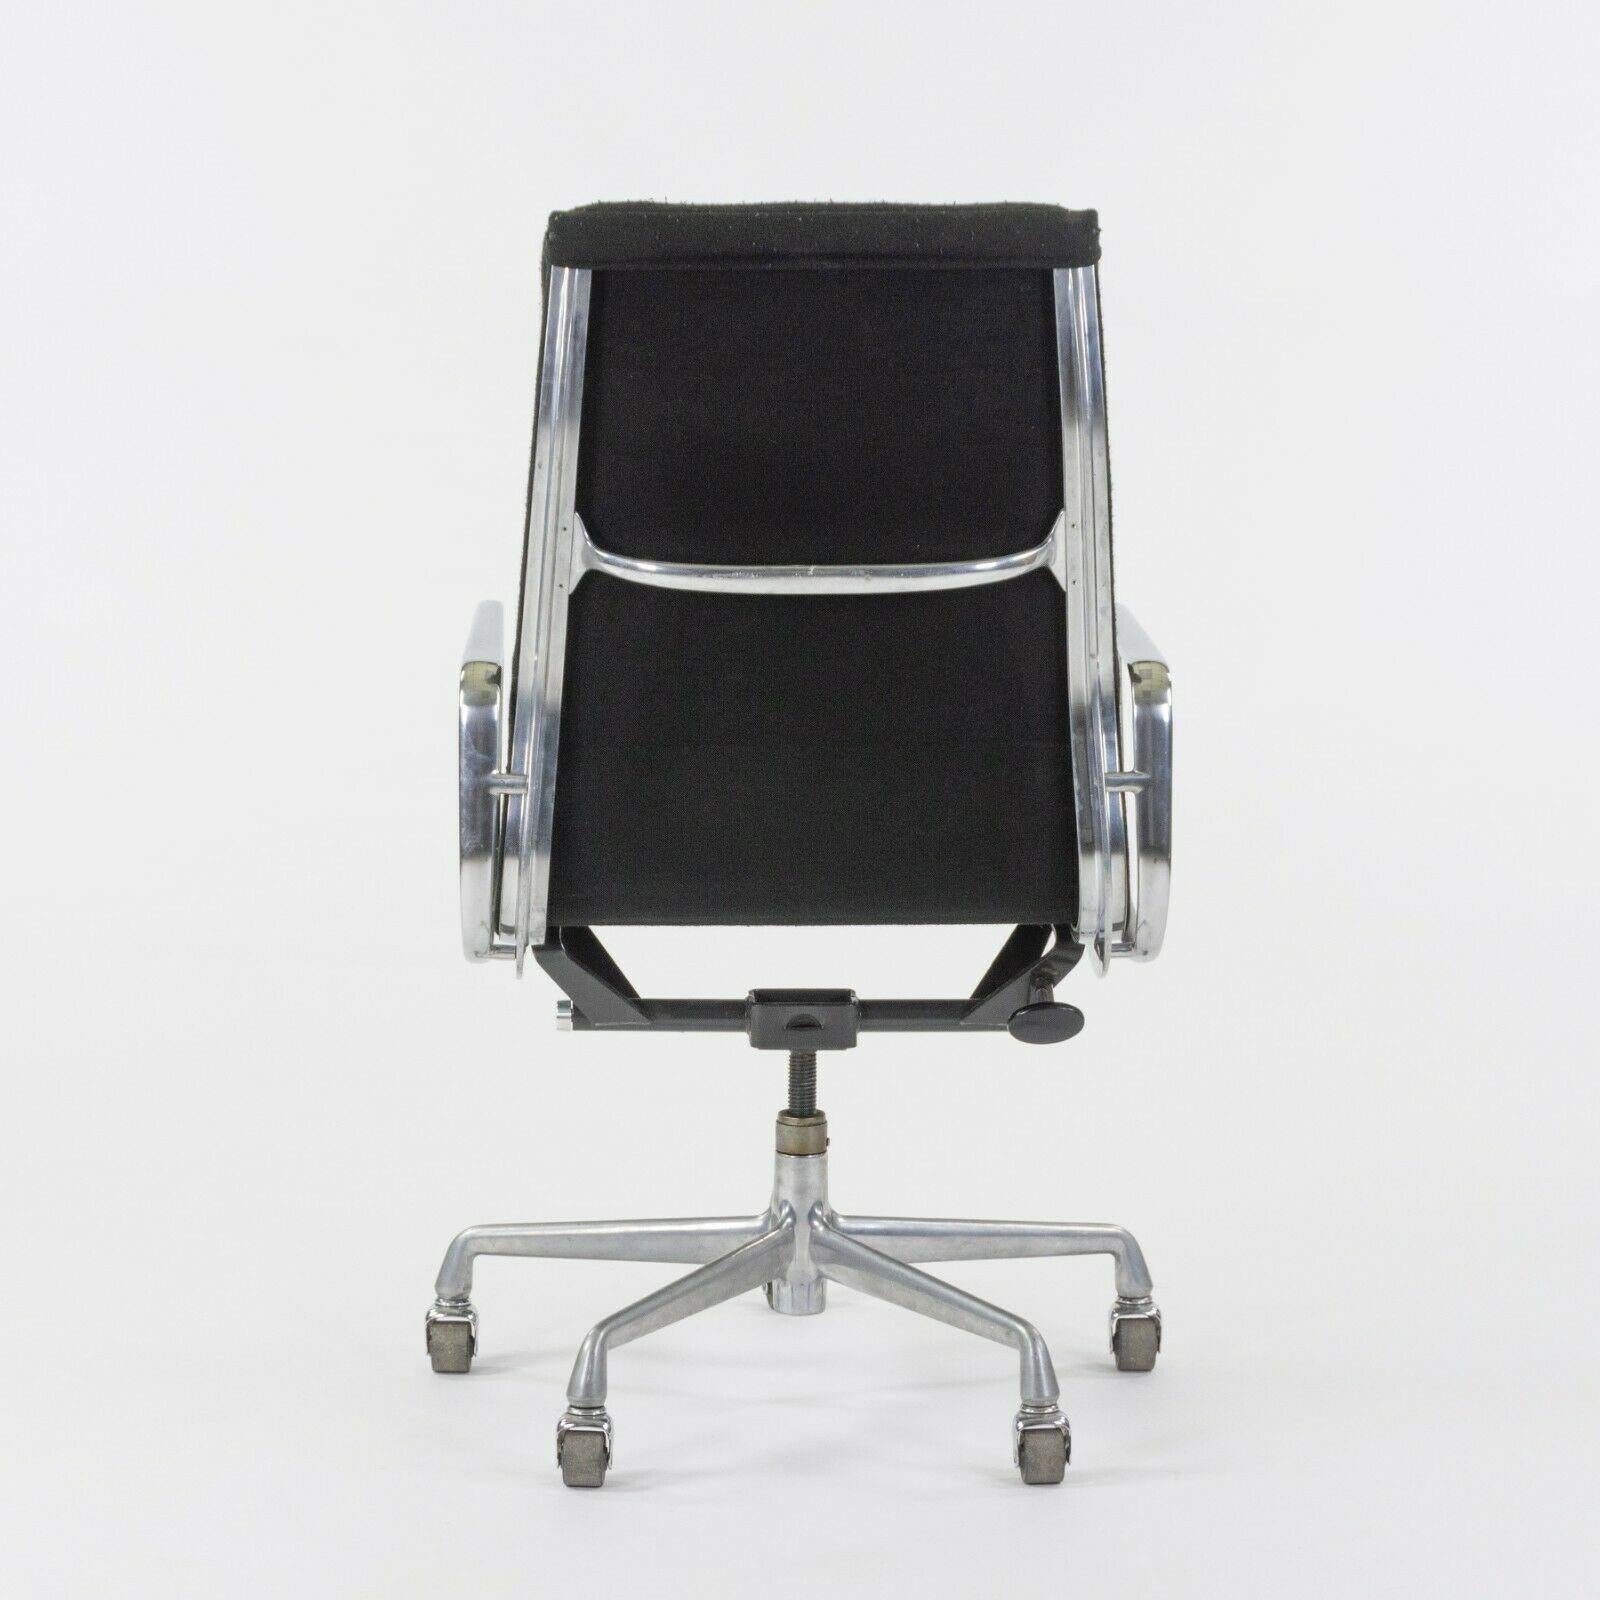 American 1985 Fabric Herman Miller Eames Aluminum Group Executive High Back Desk Chair For Sale